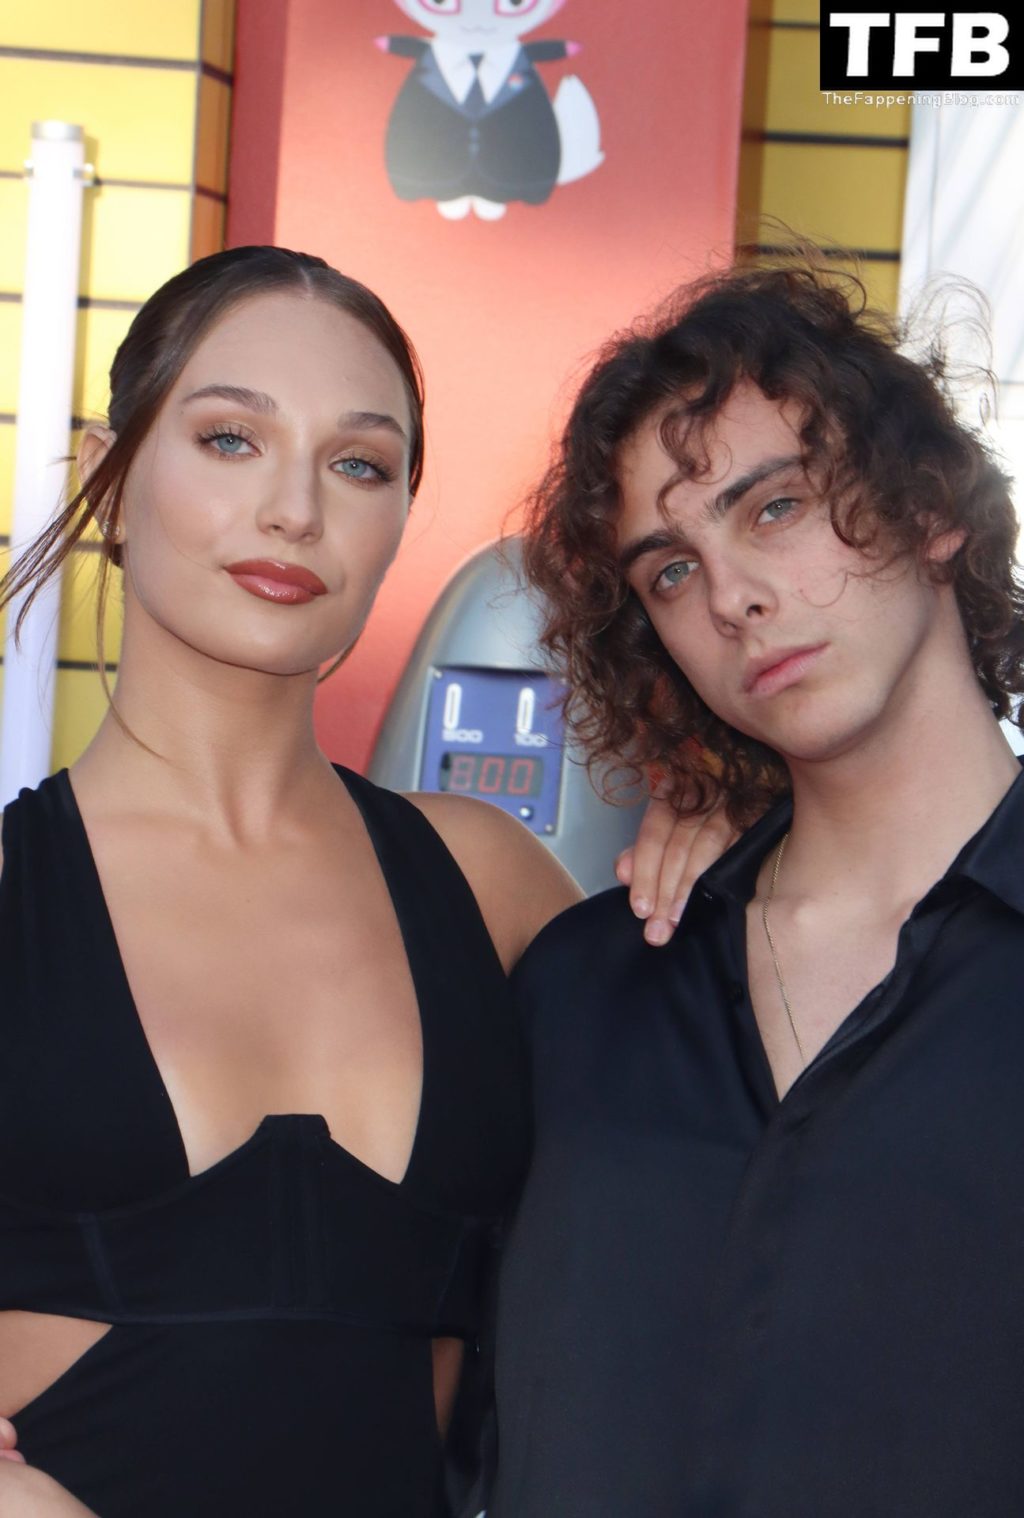 Maddie Ziegler Looks Hot in a Black Dress at the LA Premiere of Sony Pictures’ “Bullet Train” (148 Photos)